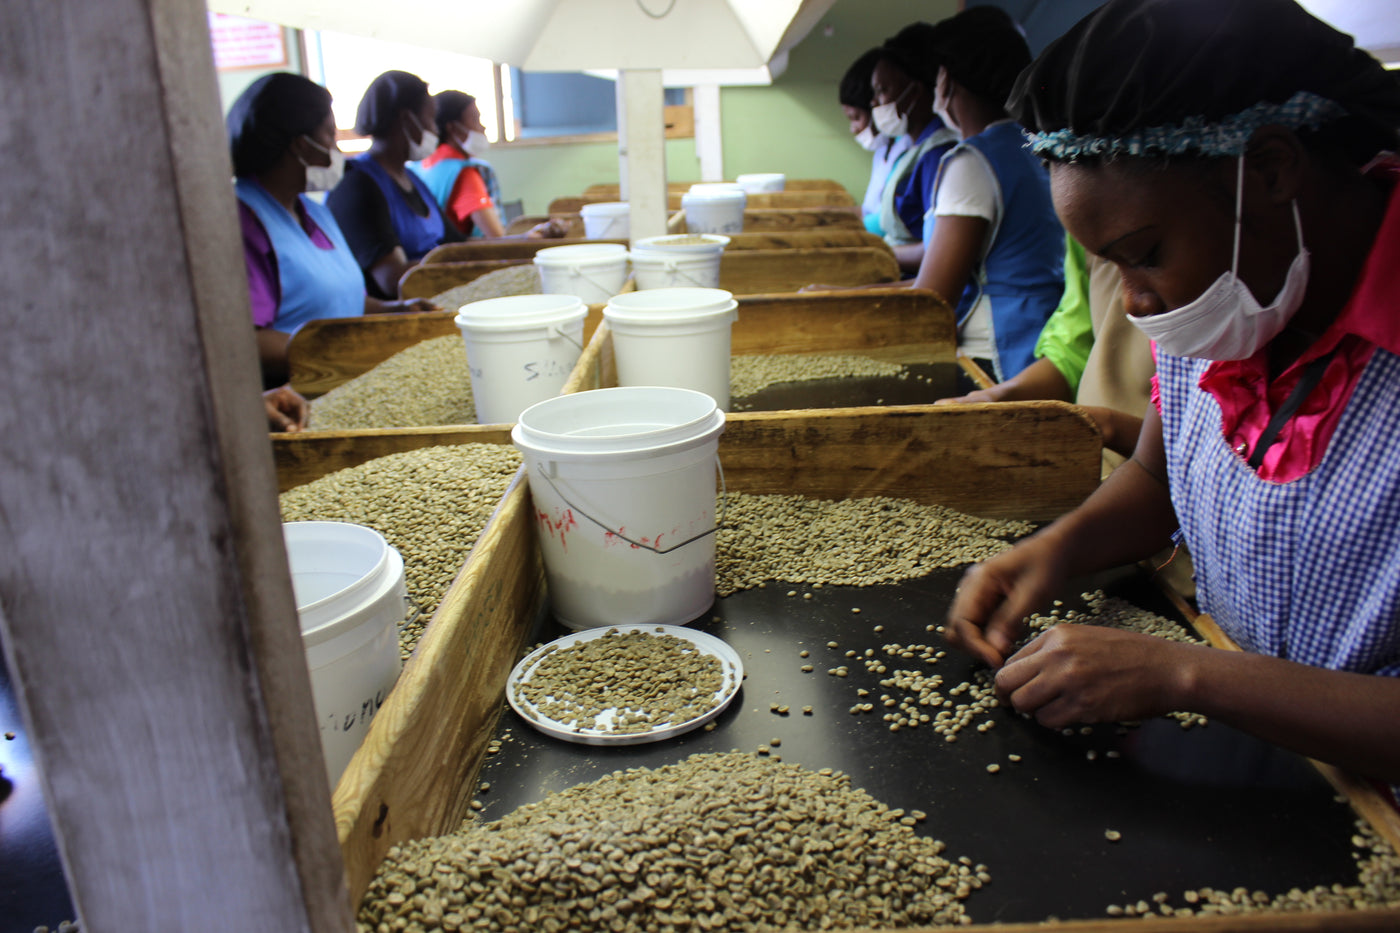 Jamaica Blue Mountain coffee beans being sorted by hand